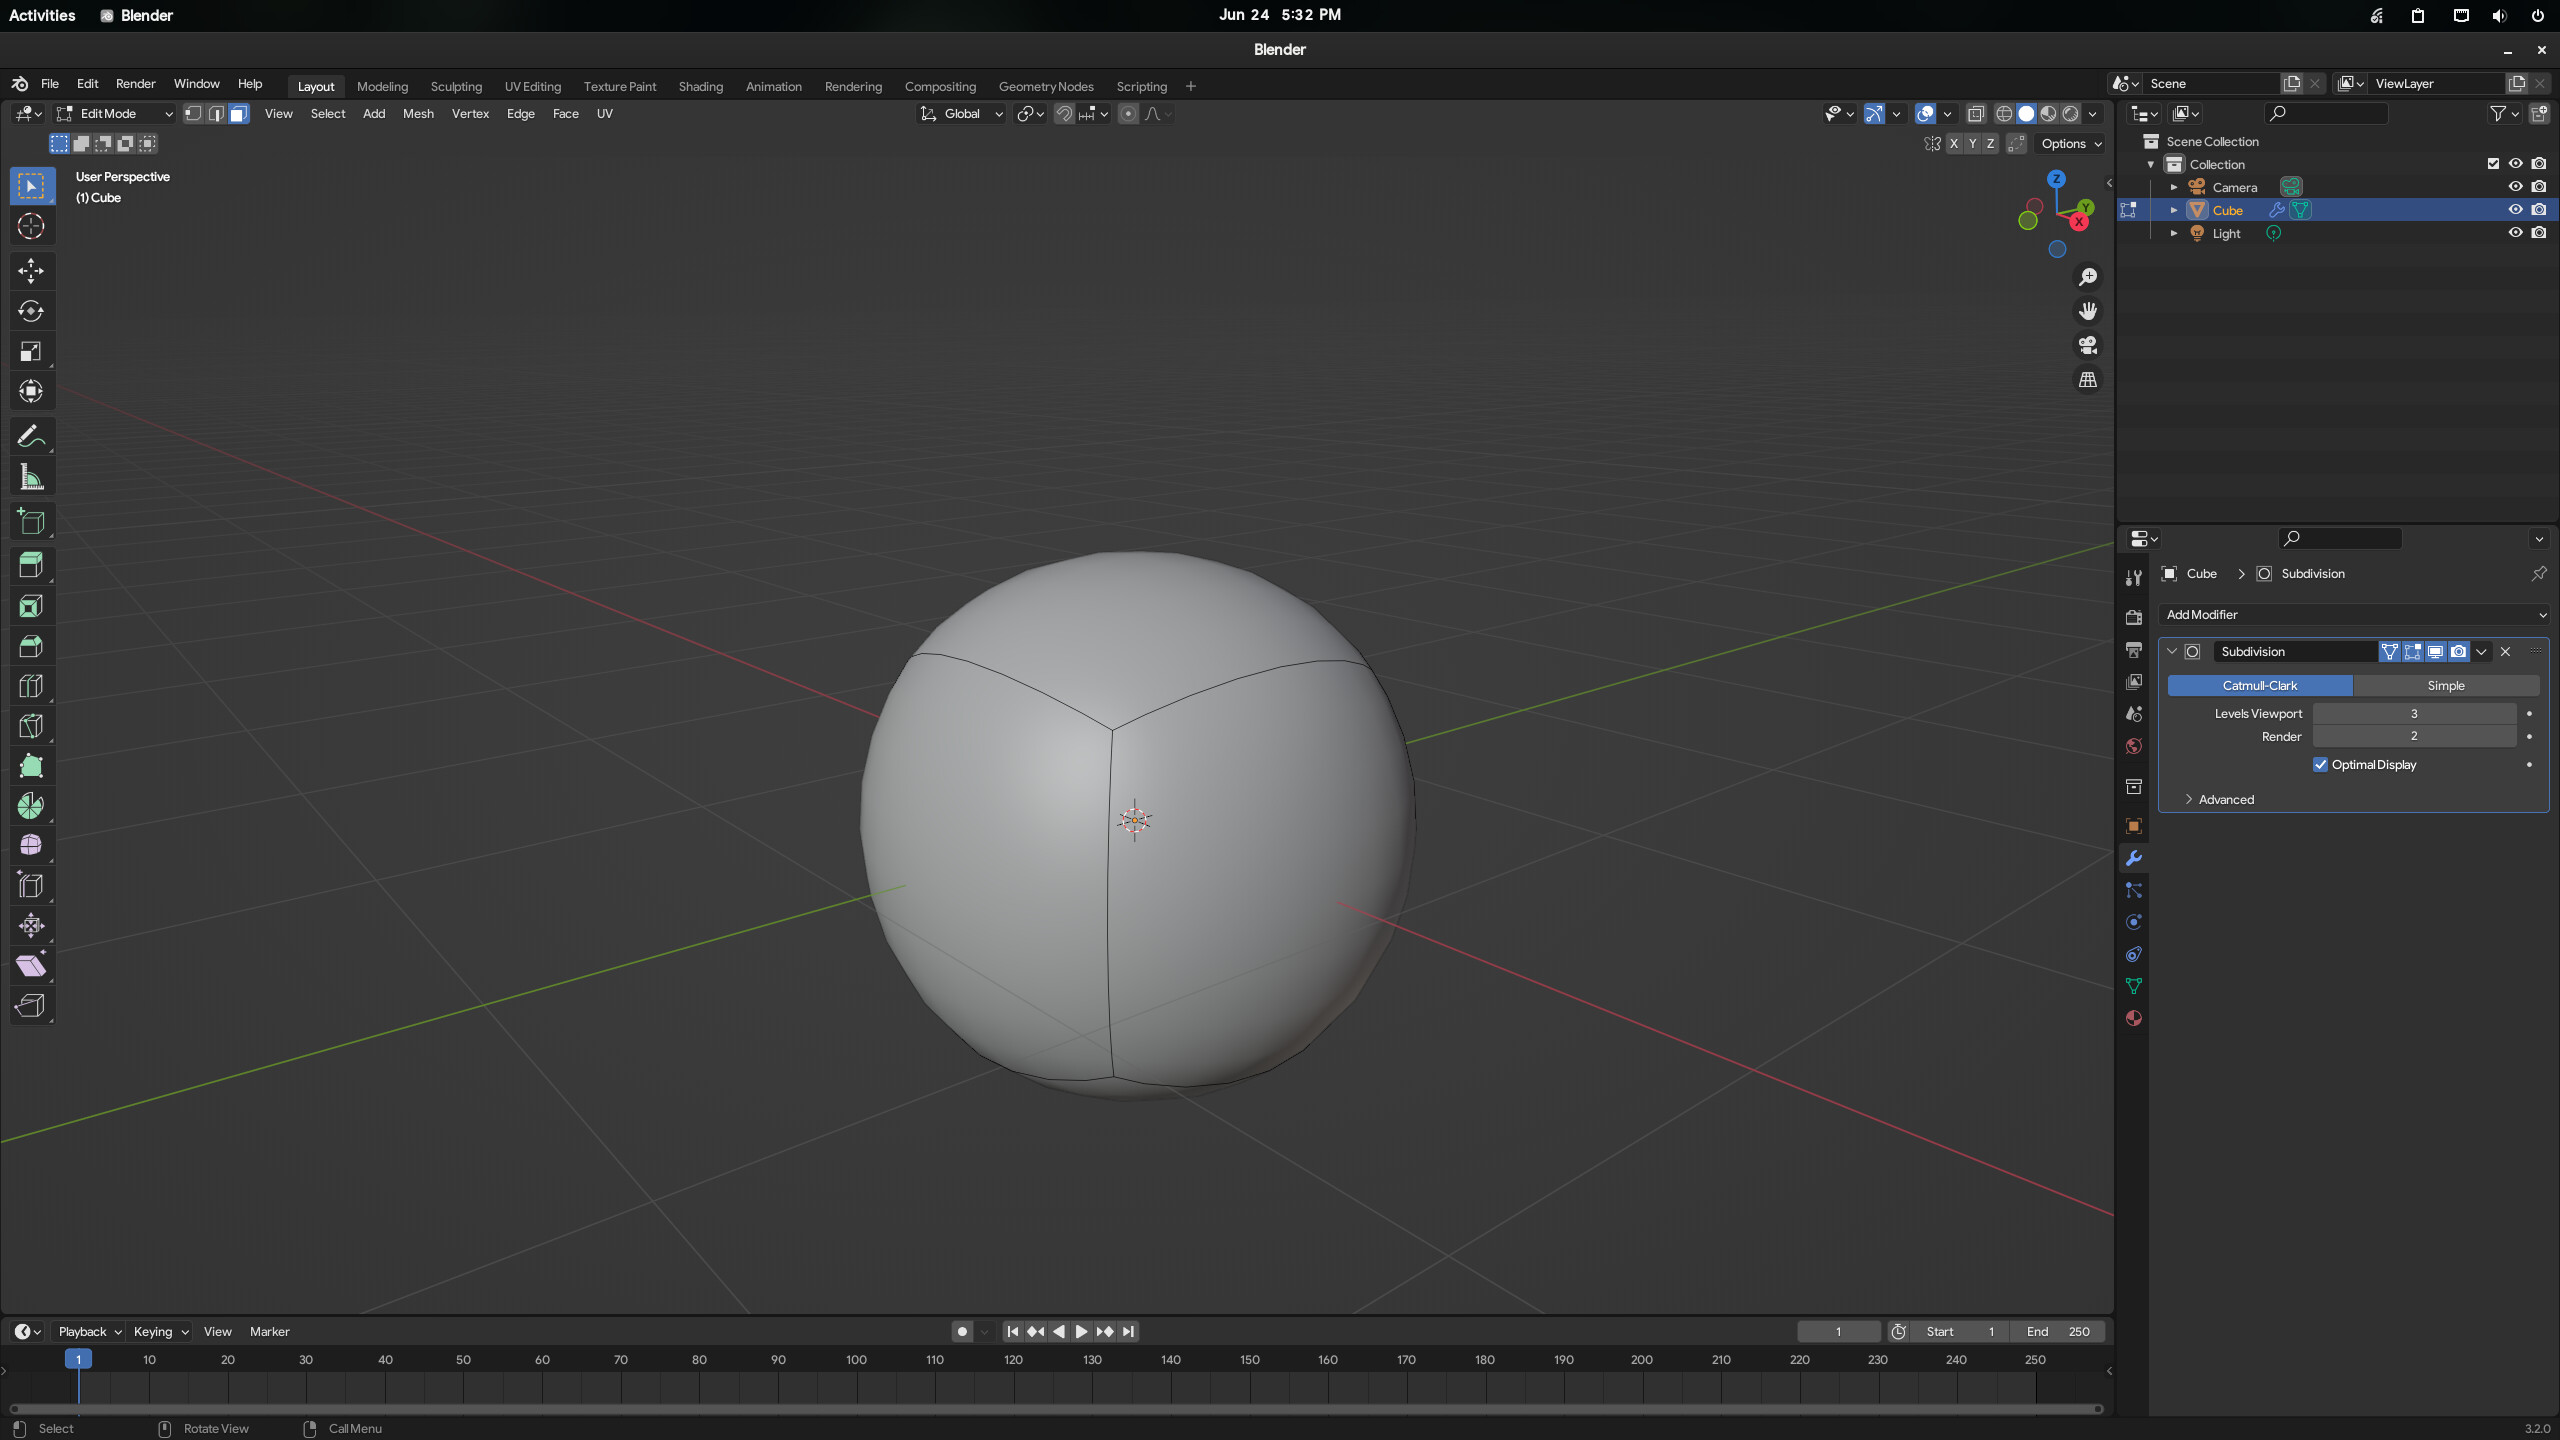 blender 2.8 shade smooth not working donut